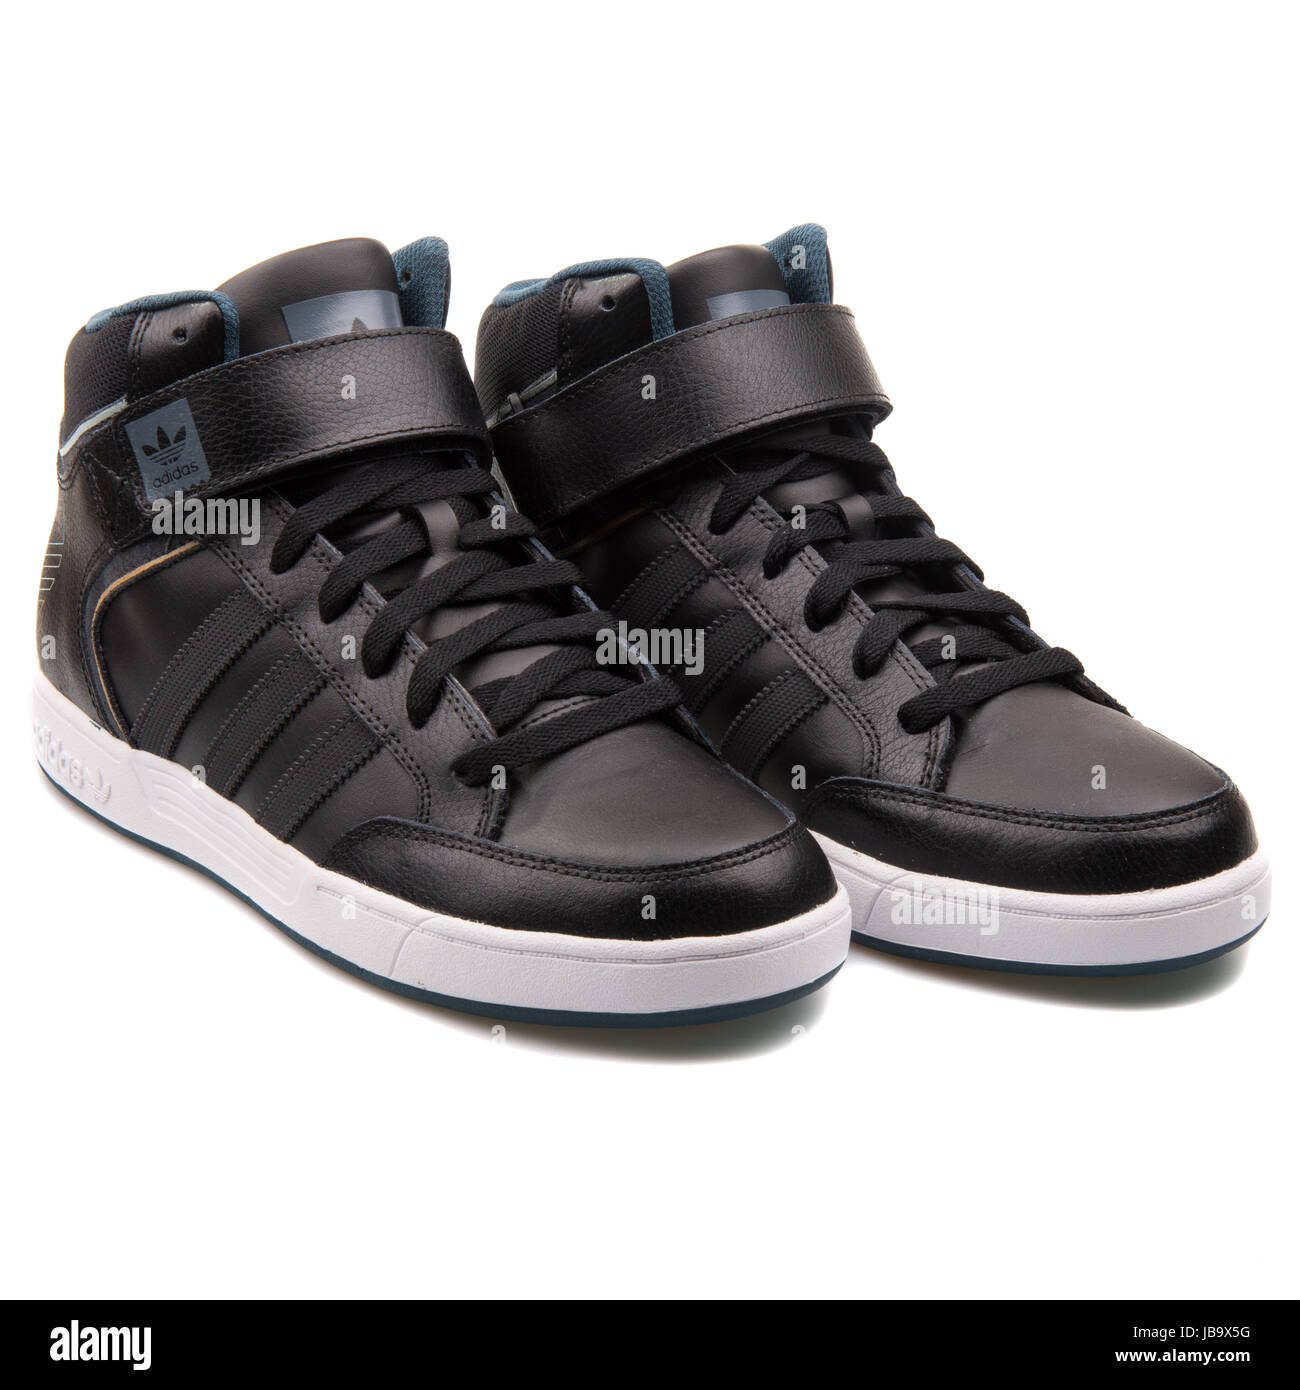 Adidas Varial Mid Black Leather Men's Basketball Shoes - D68664 Stock Photo  - Alamy